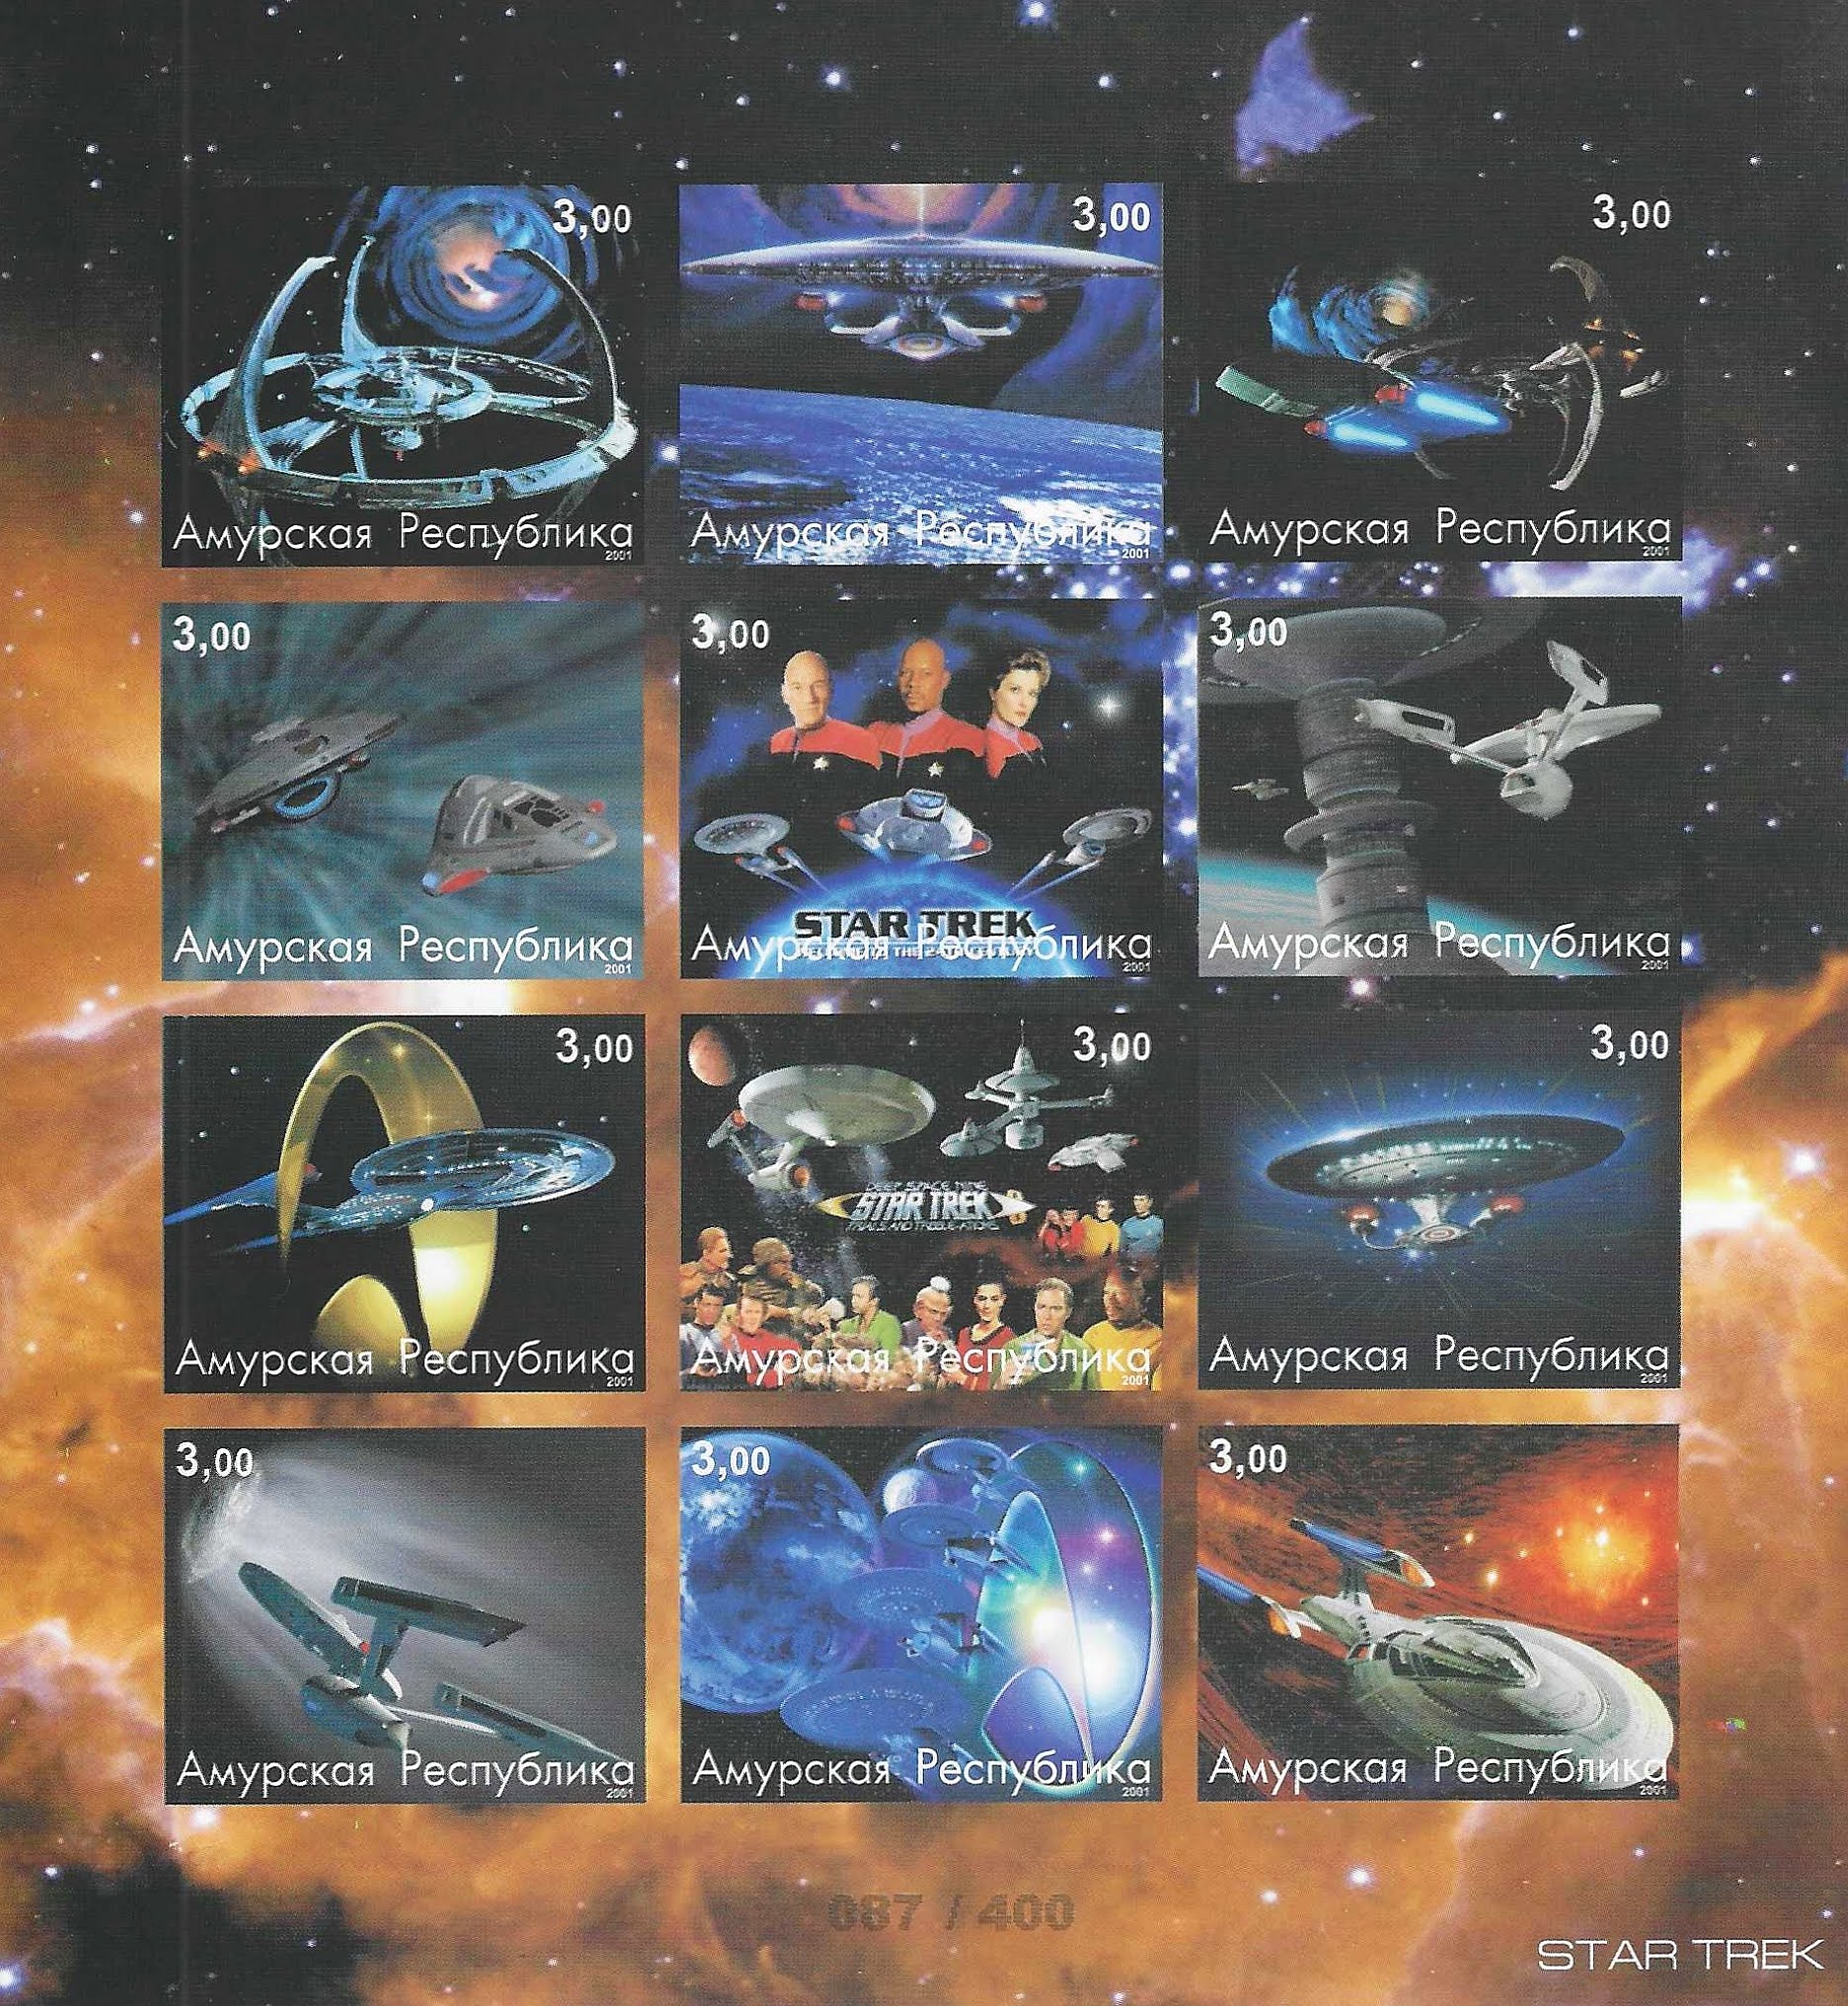 Star Trek stamps from Russia